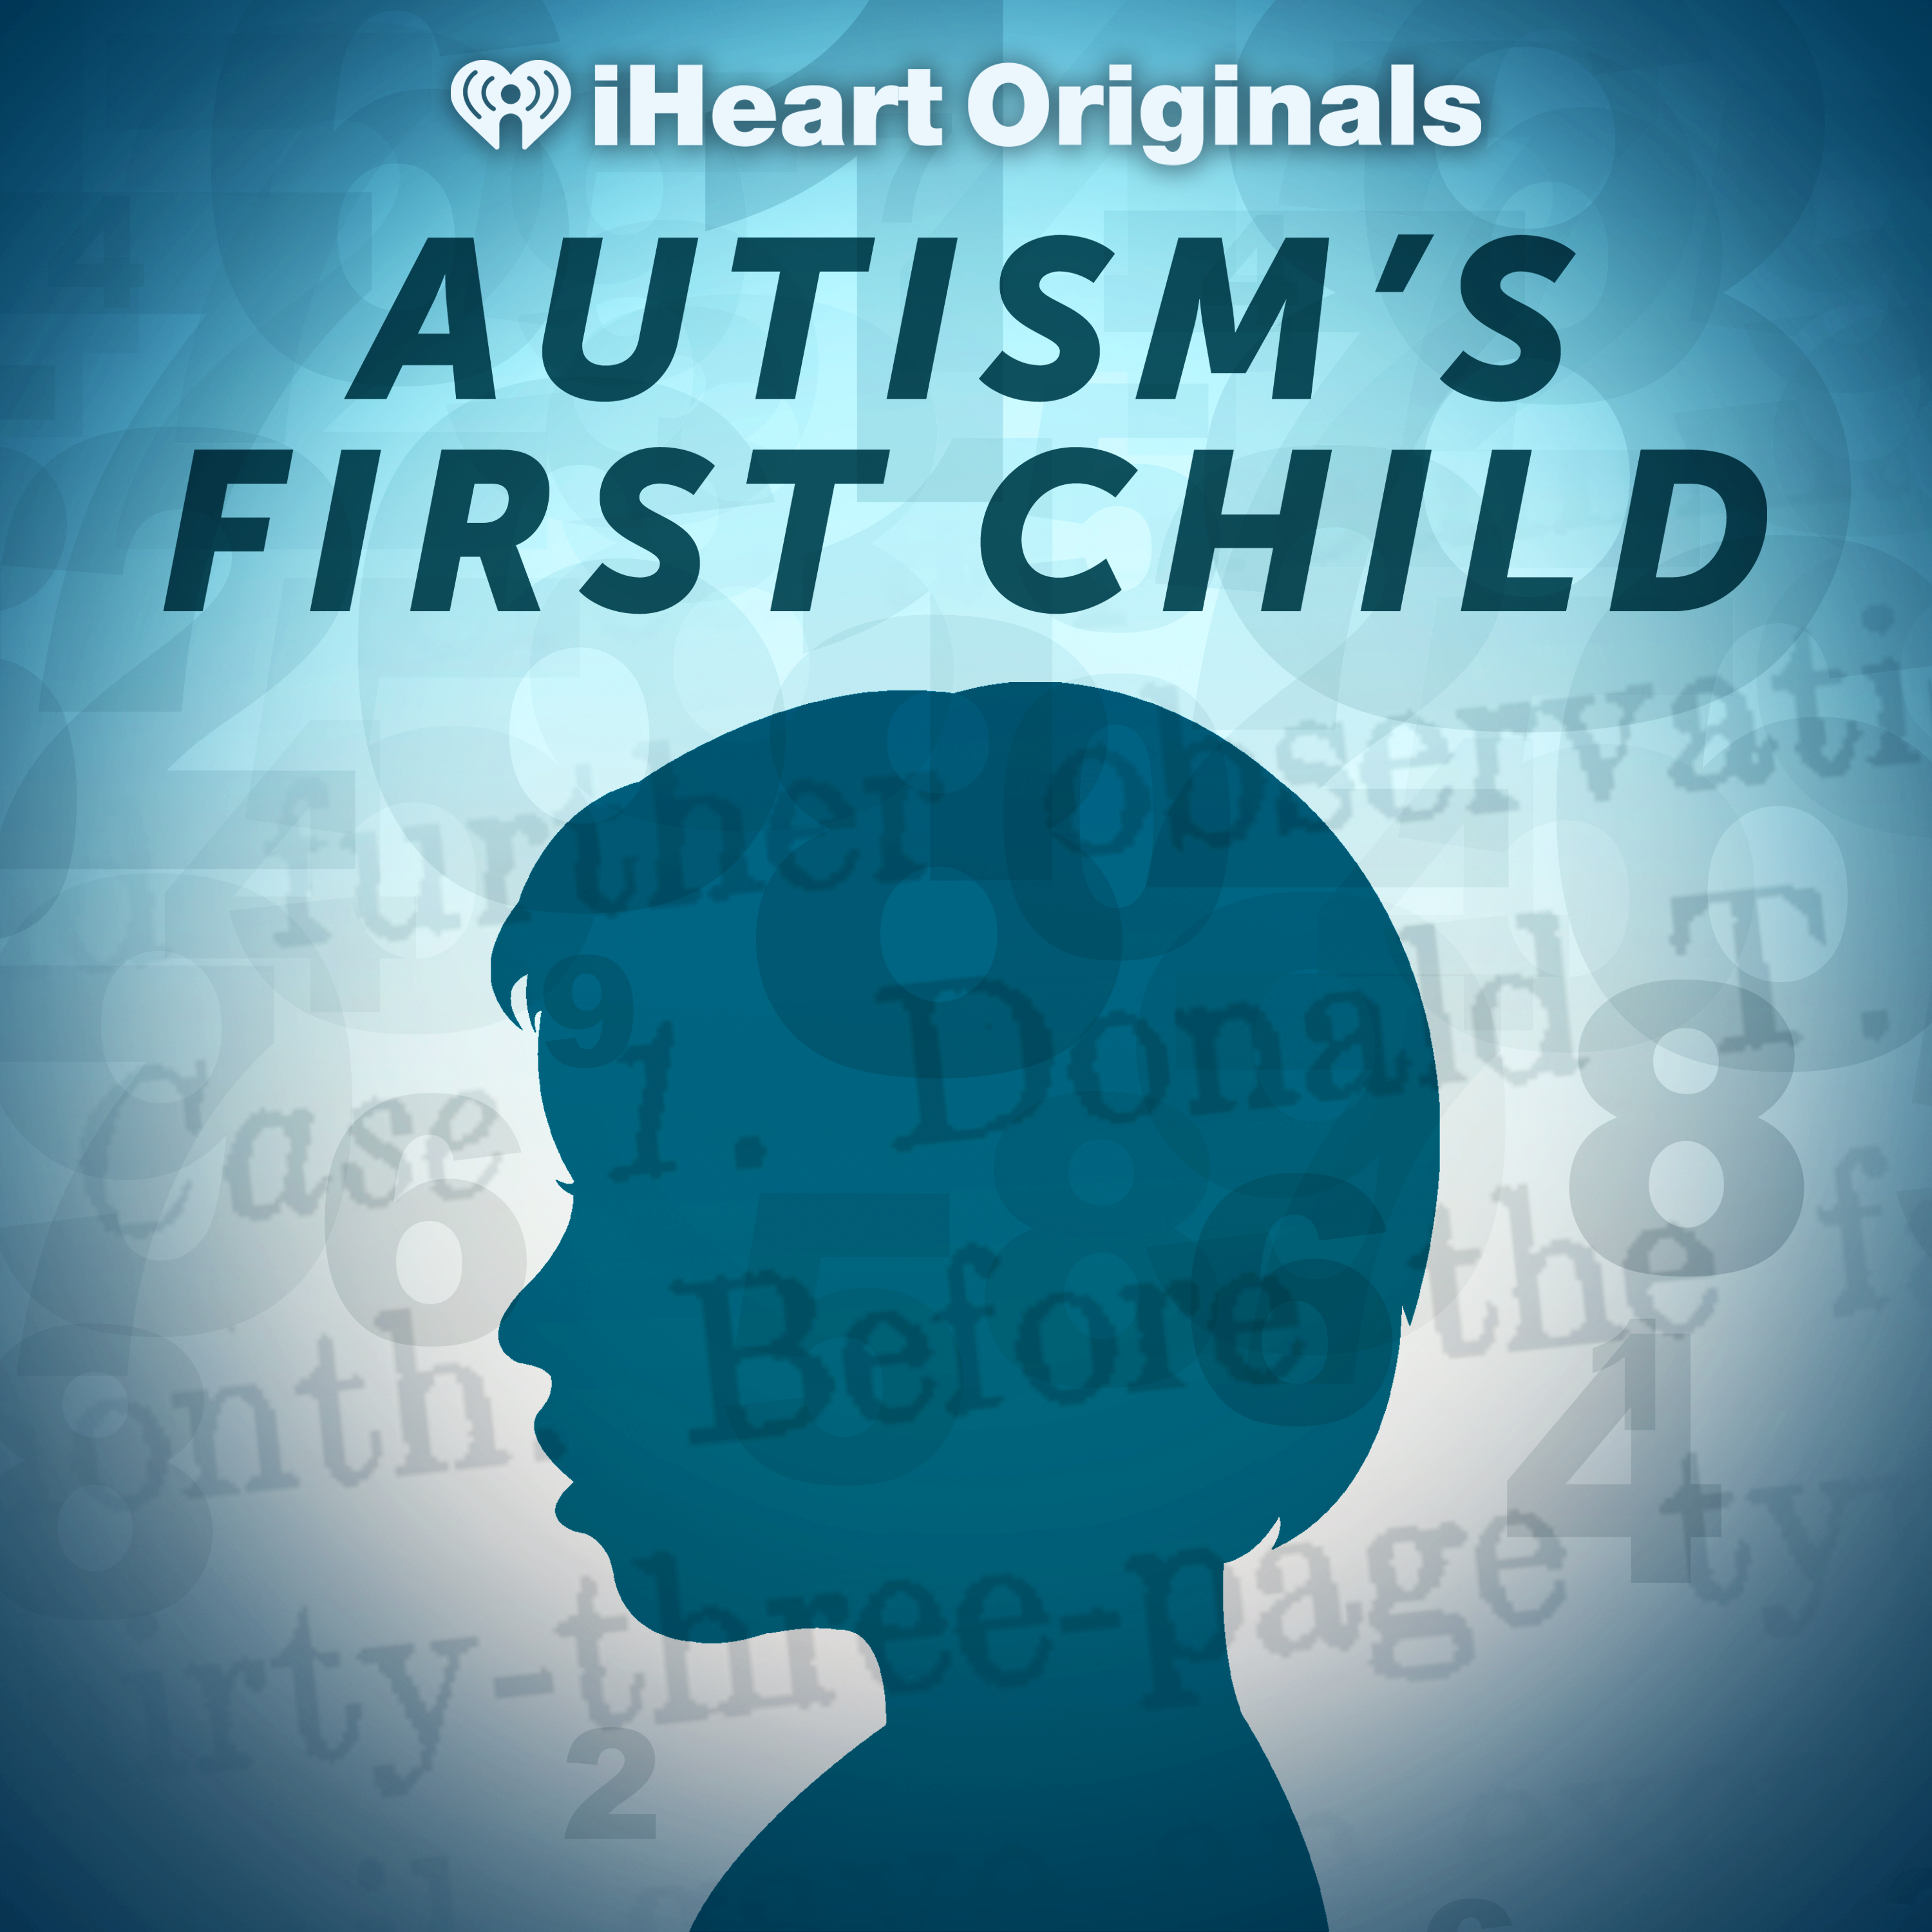 Introducing: Autism's First Child